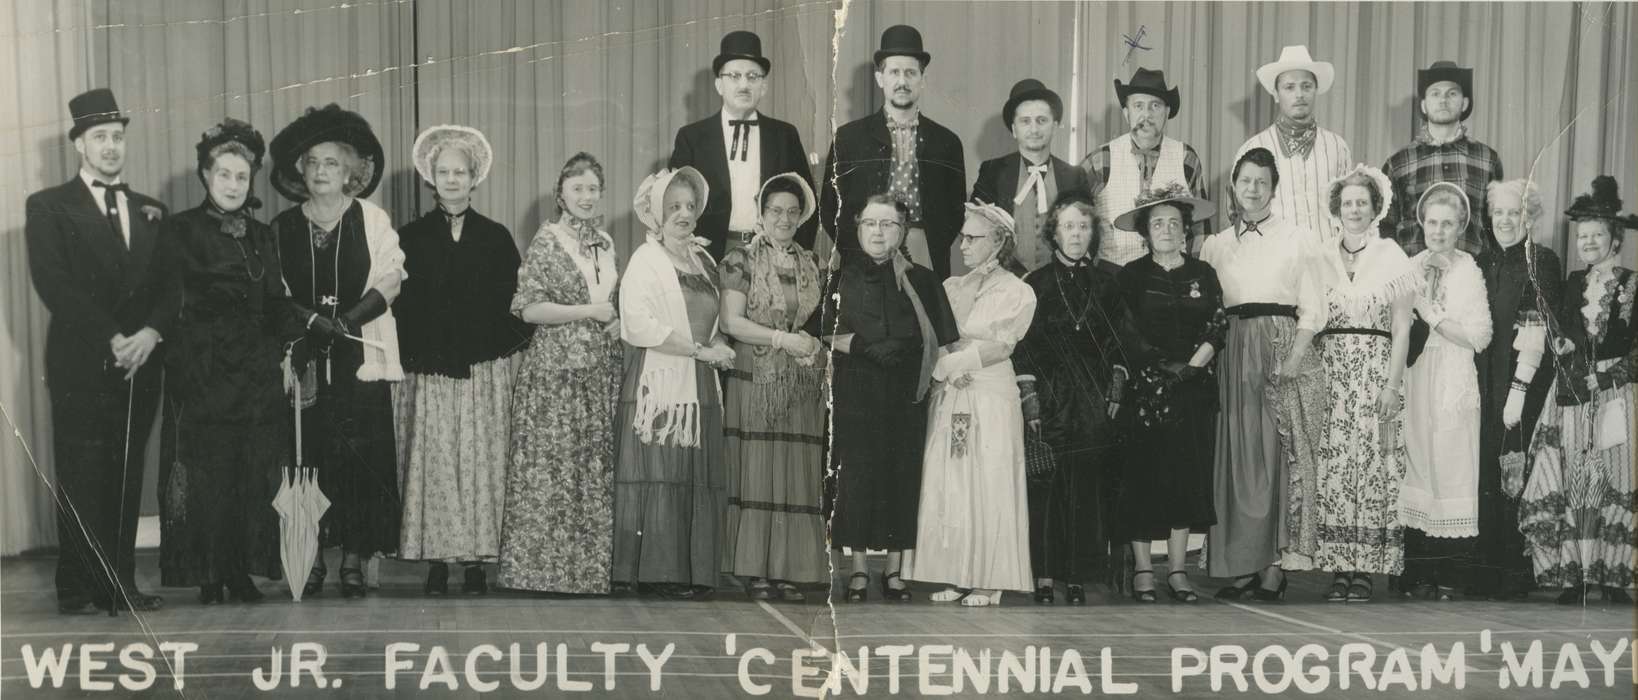 Sioux City, IA, play, performance, Rossiter, Lynn, Entertainment, cowboy hat, umbrella, stage, Portraits - Group, Iowa, Schools and Education, Iowa History, history of Iowa